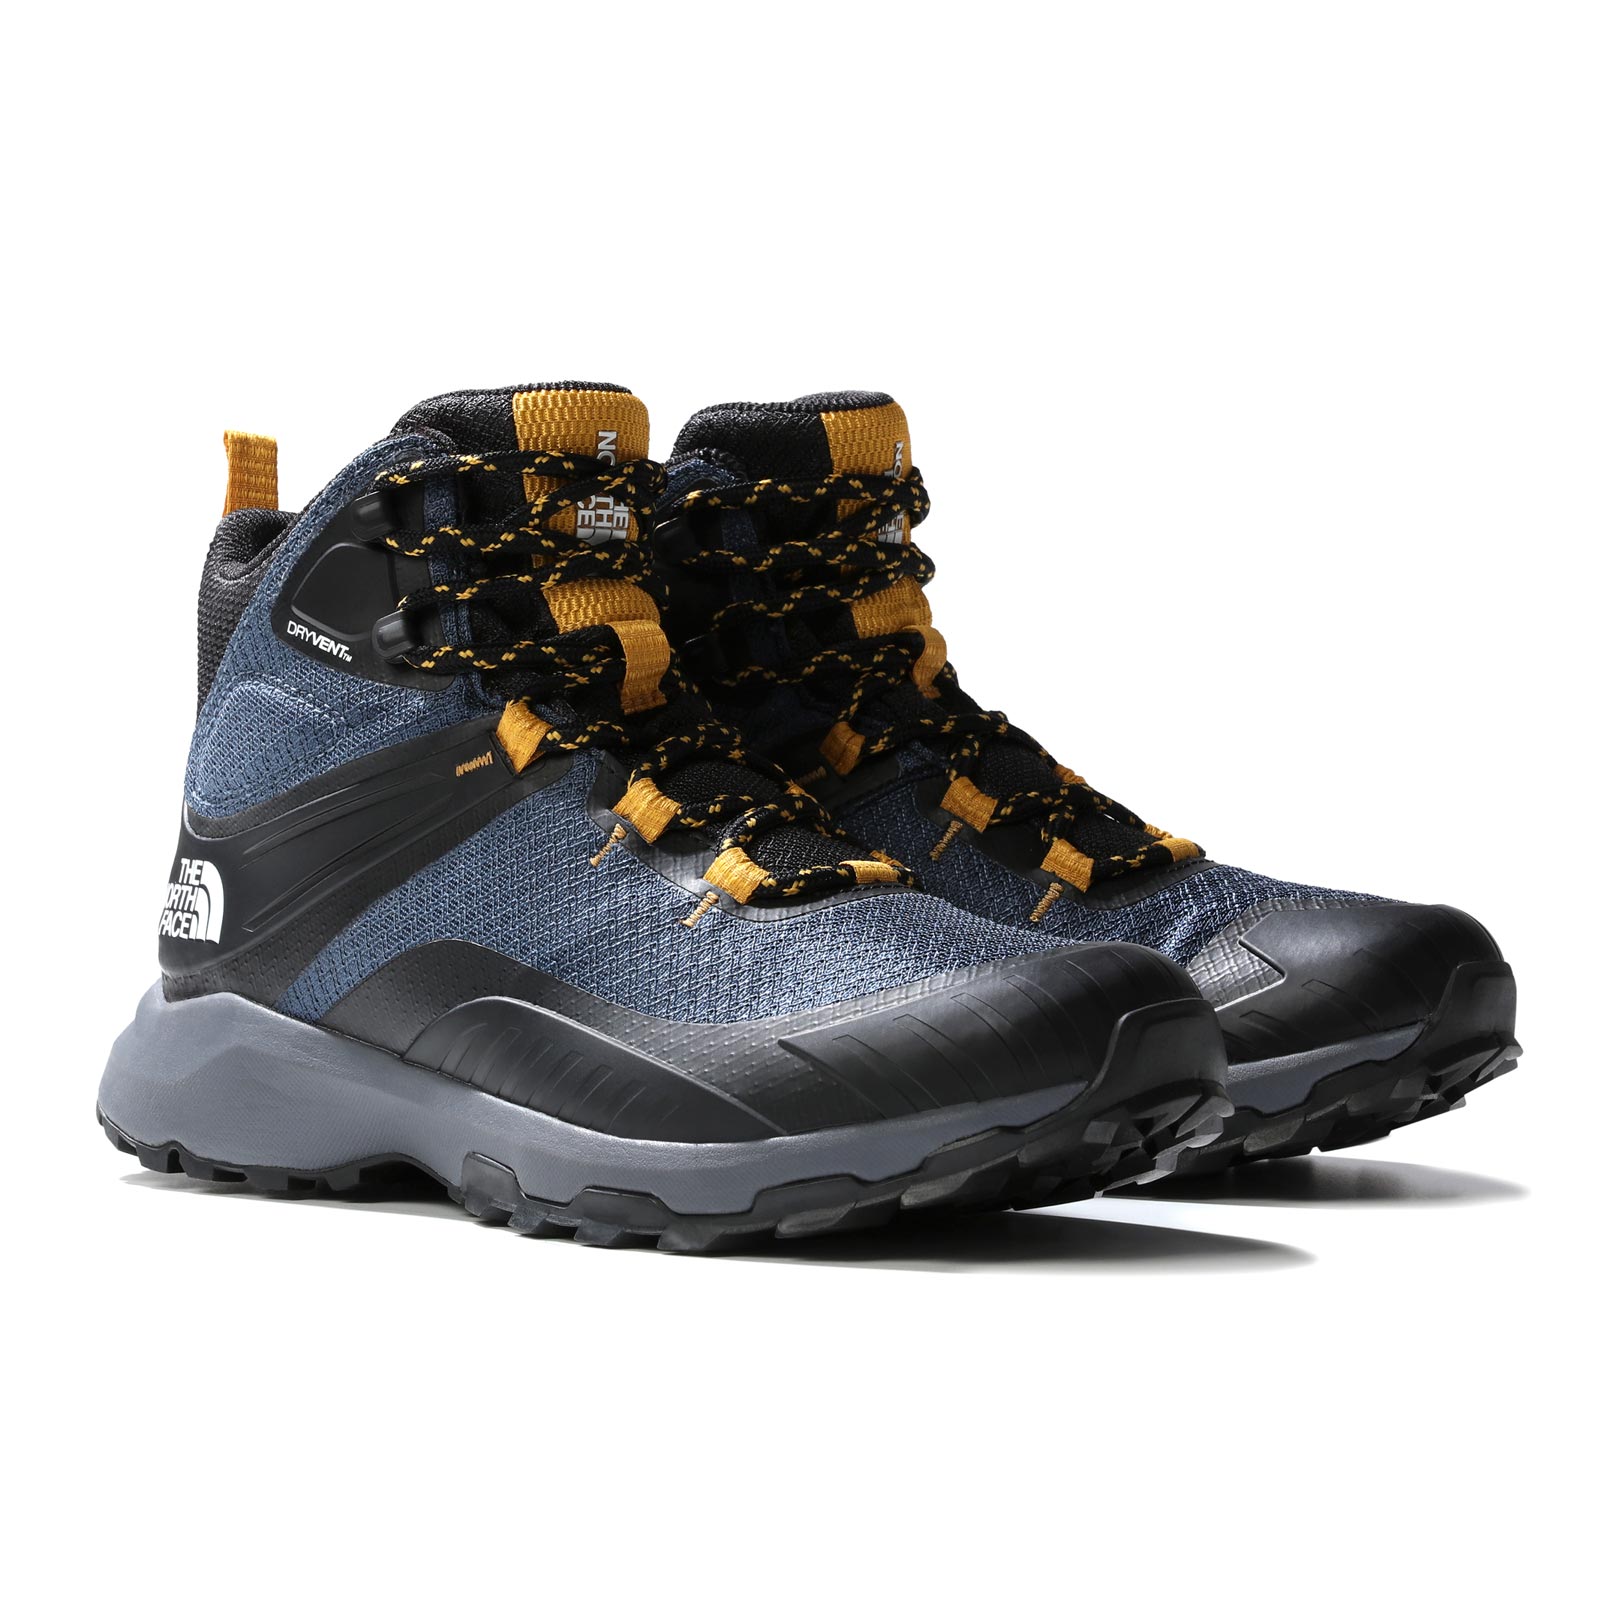 THE NORTH FACE CRAGMONT MID WP MENS HIKING BOOTS